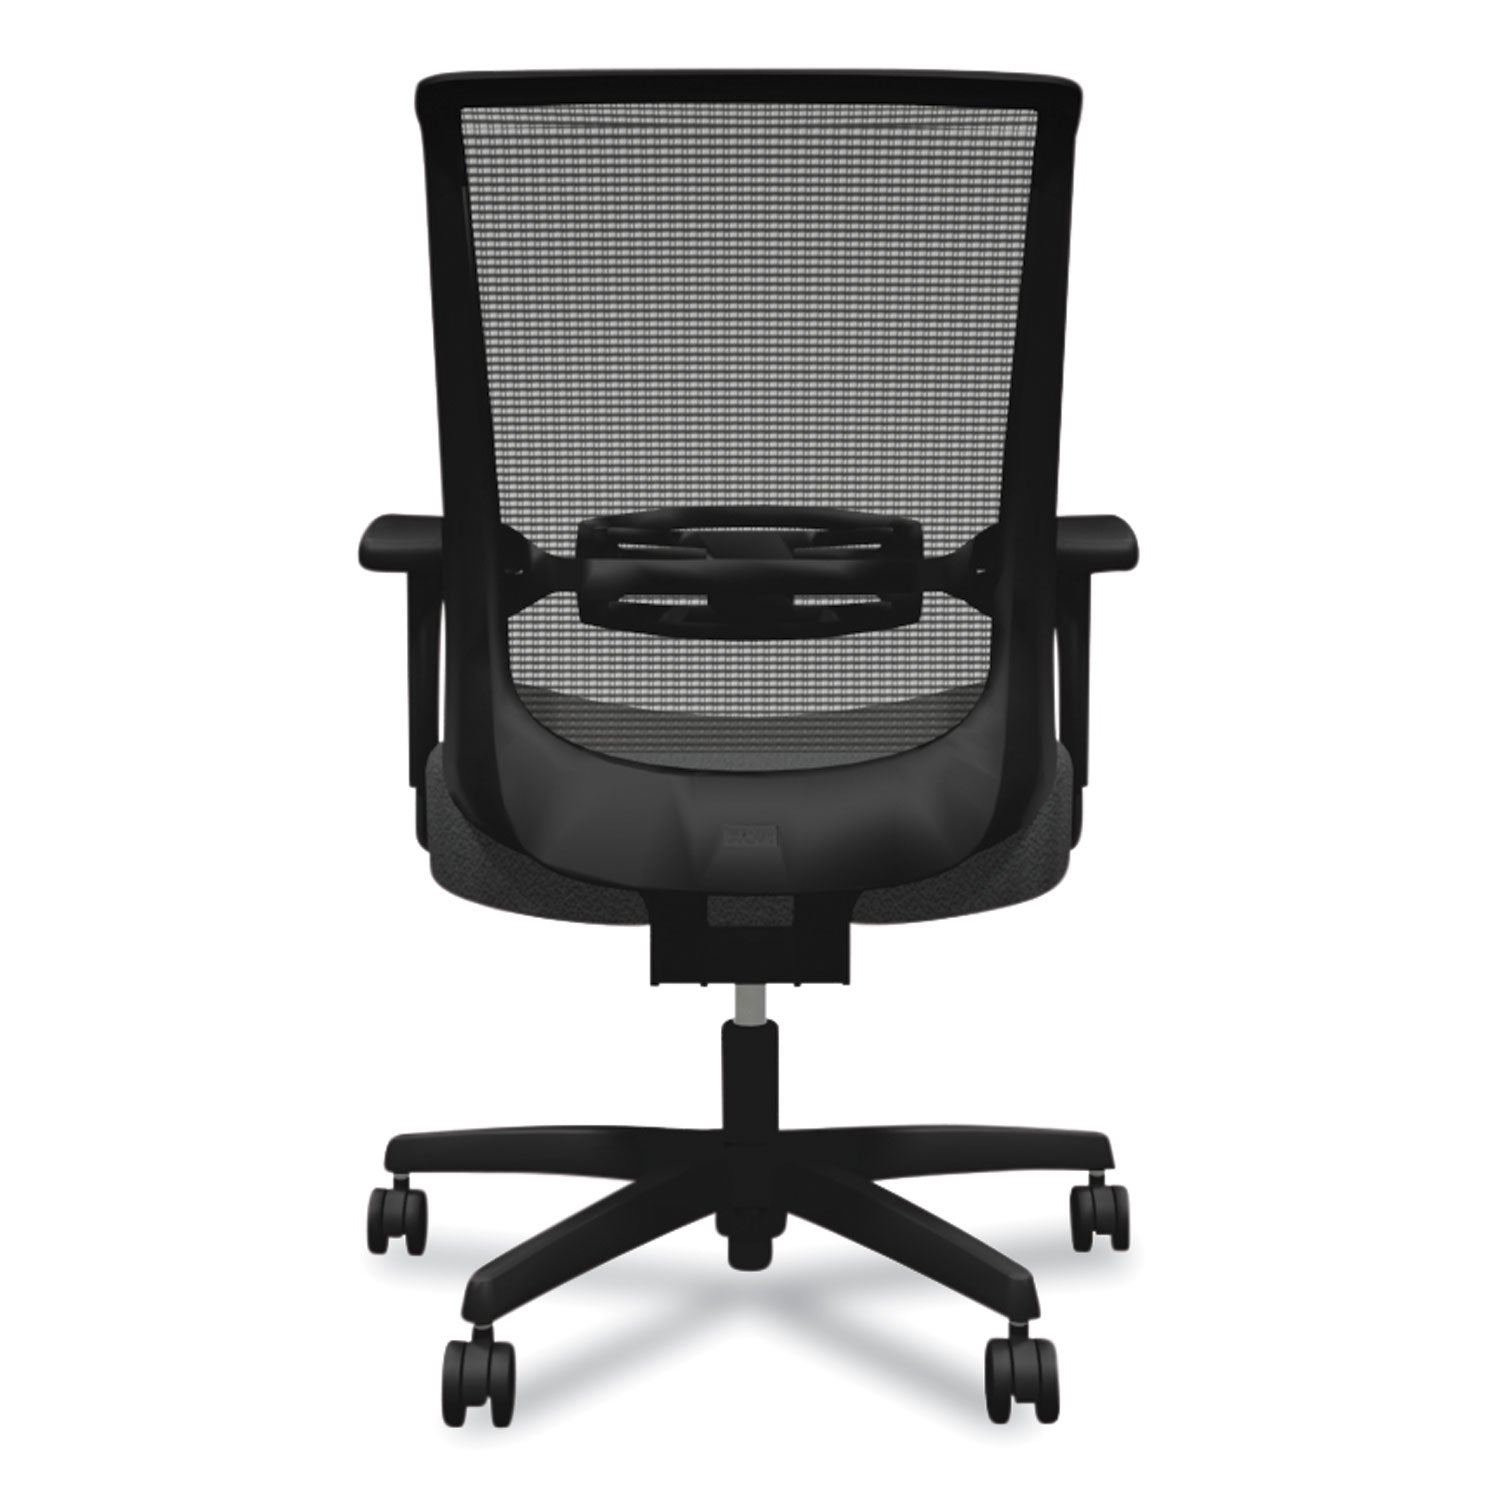 convergence-mid-back-task-chair-synchro-tilt-and-seat-glide-supports-up-to-275-lb-iron-ore-seat-black-back-base_honcmy1acu19 - 4